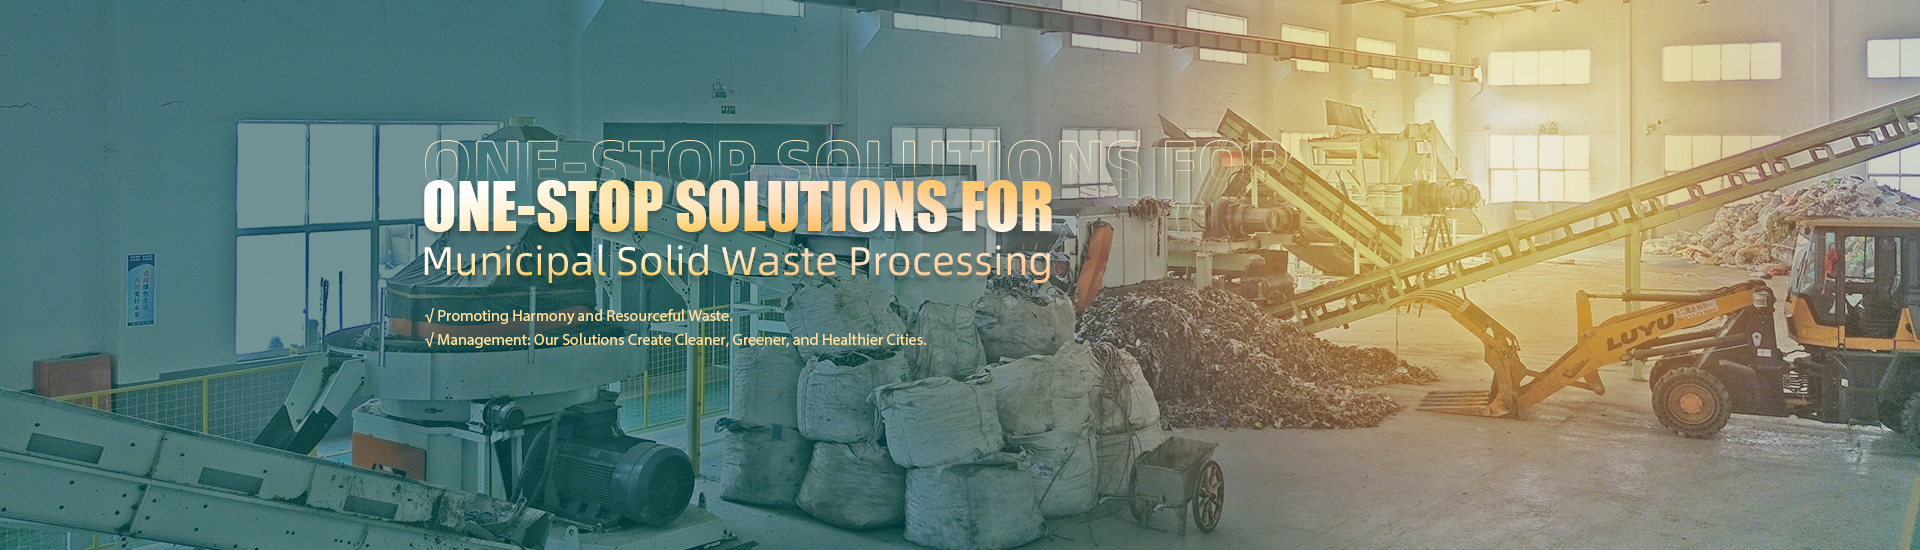 Municipal Solid Waste Processing Solution